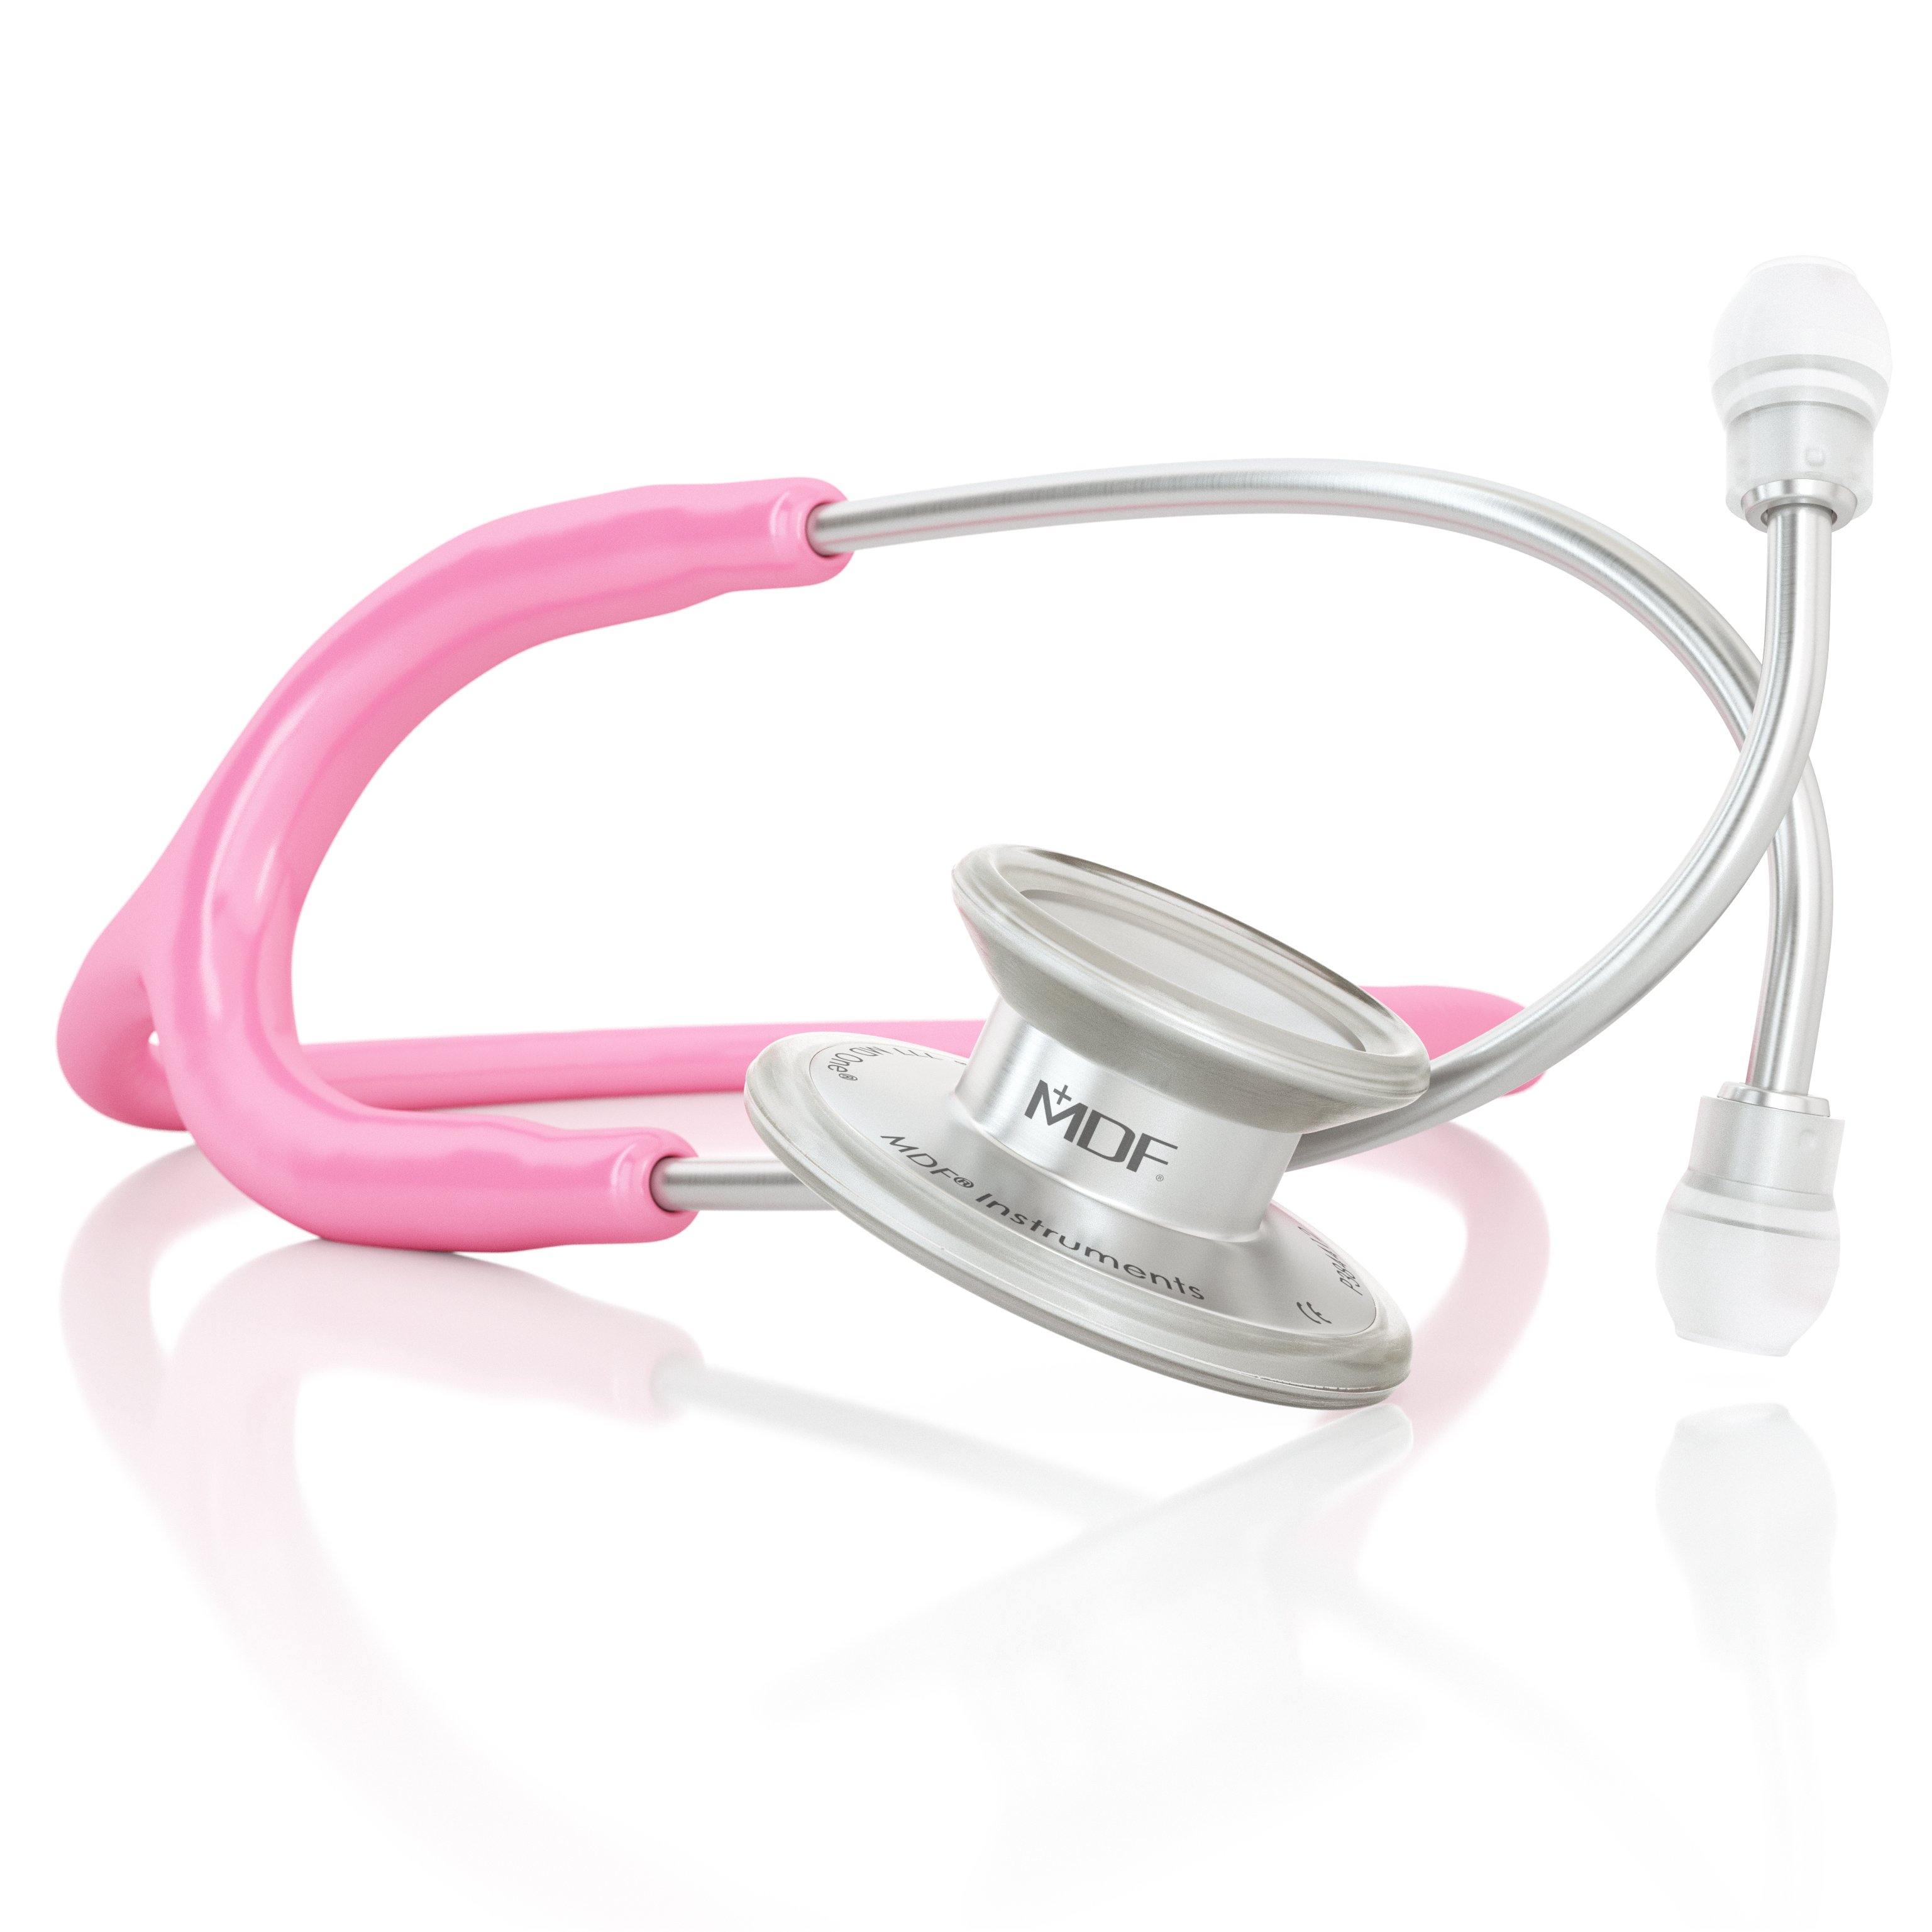 http://mdfinstruments.com/cdn/shop/products/mdf-stethoscope-md-one-r-adult-stethoscope-pink-1.jpg?v=1645559731